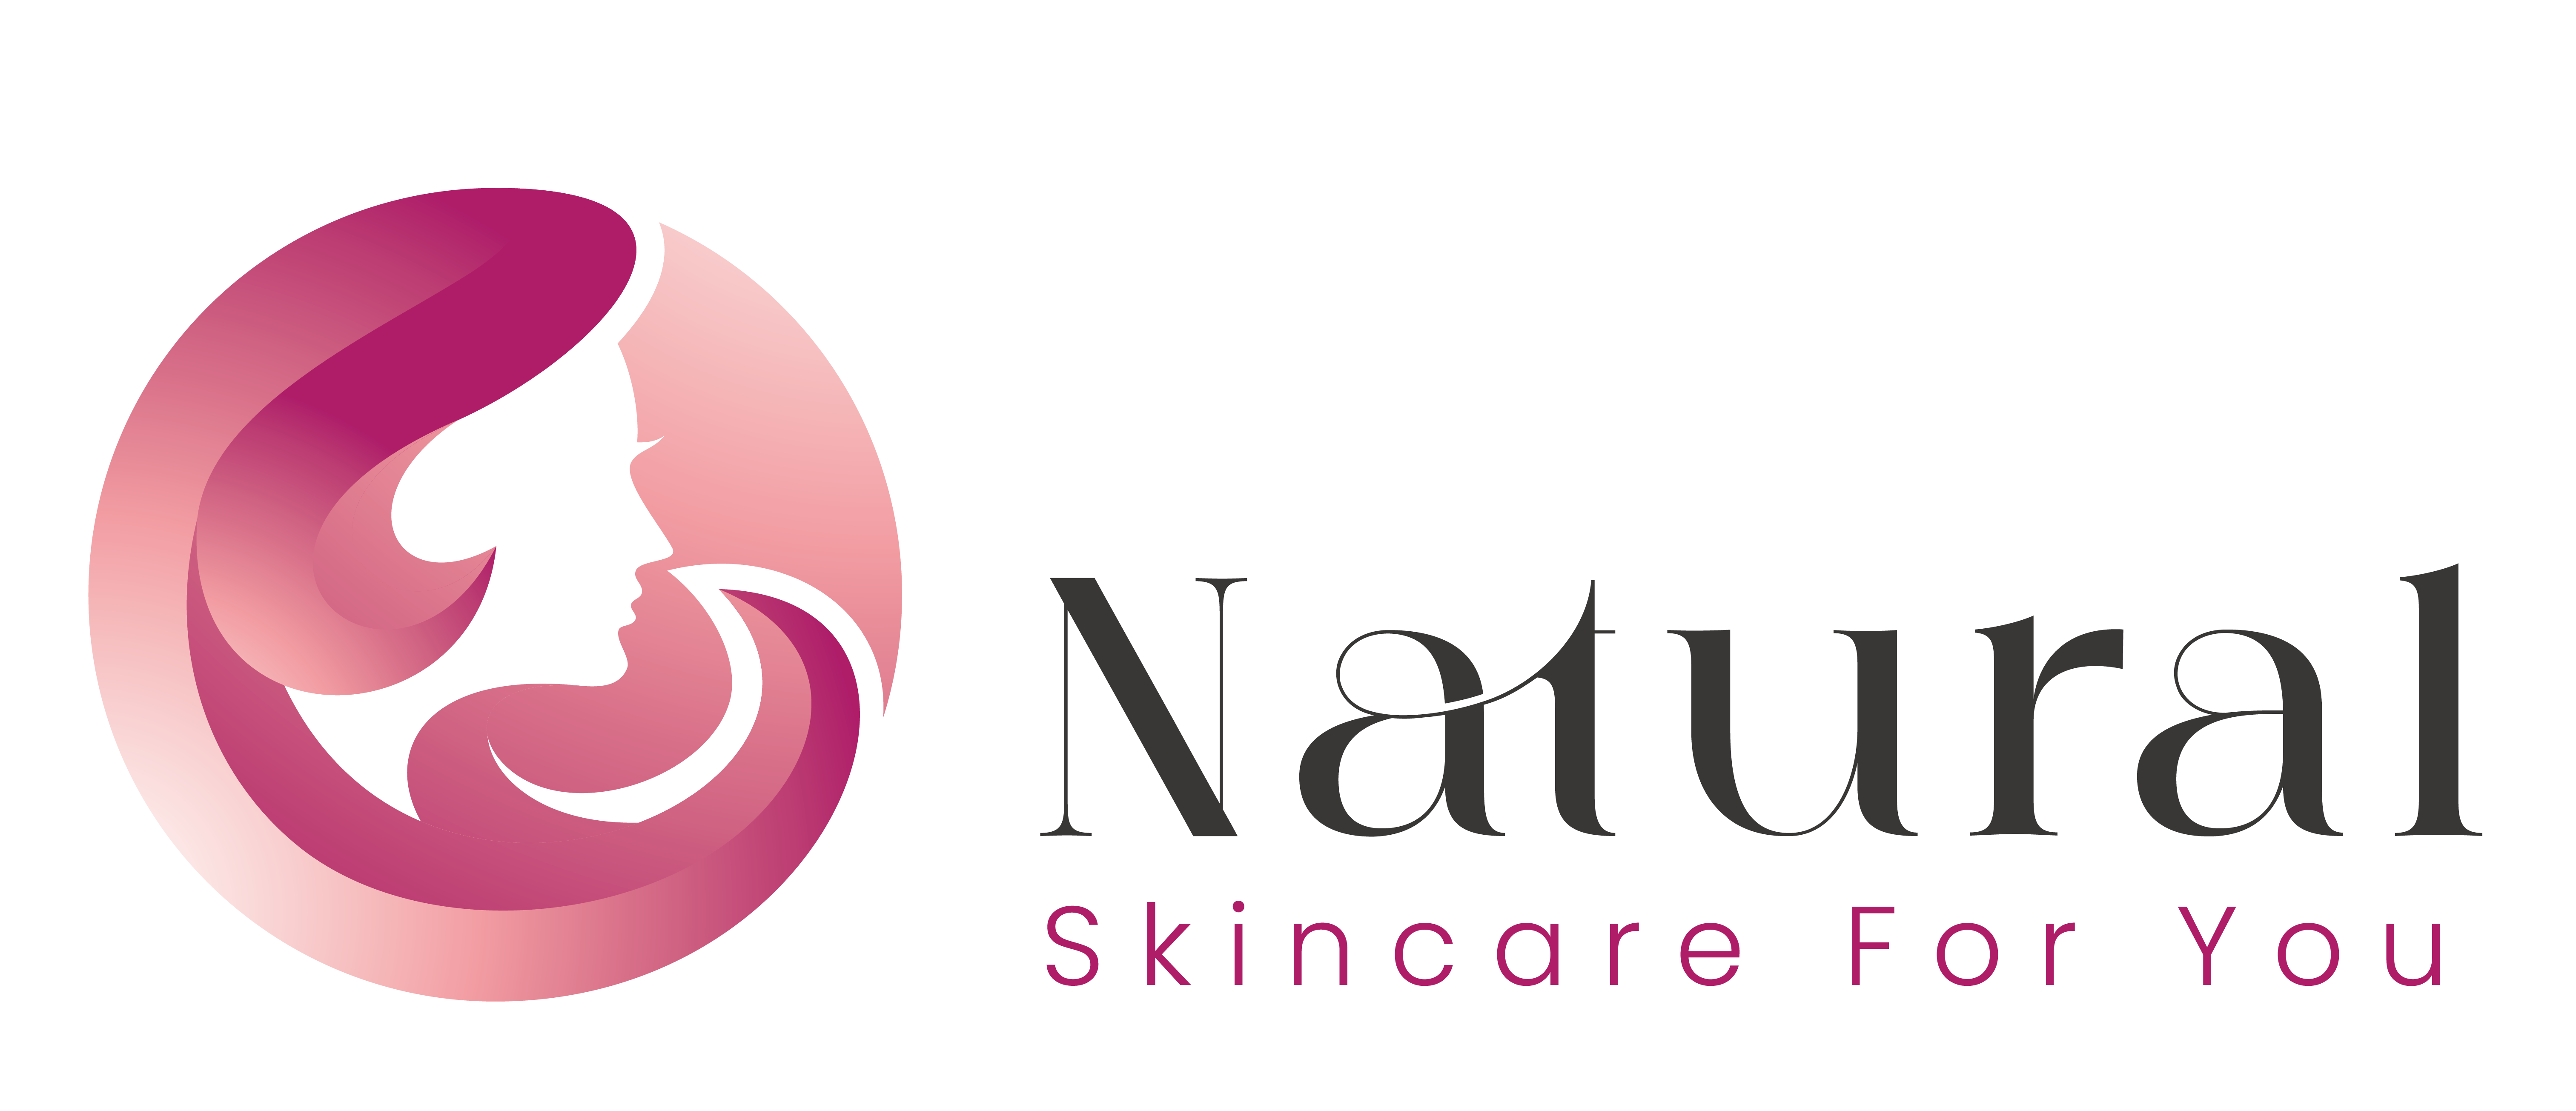 Natural Skincare For You